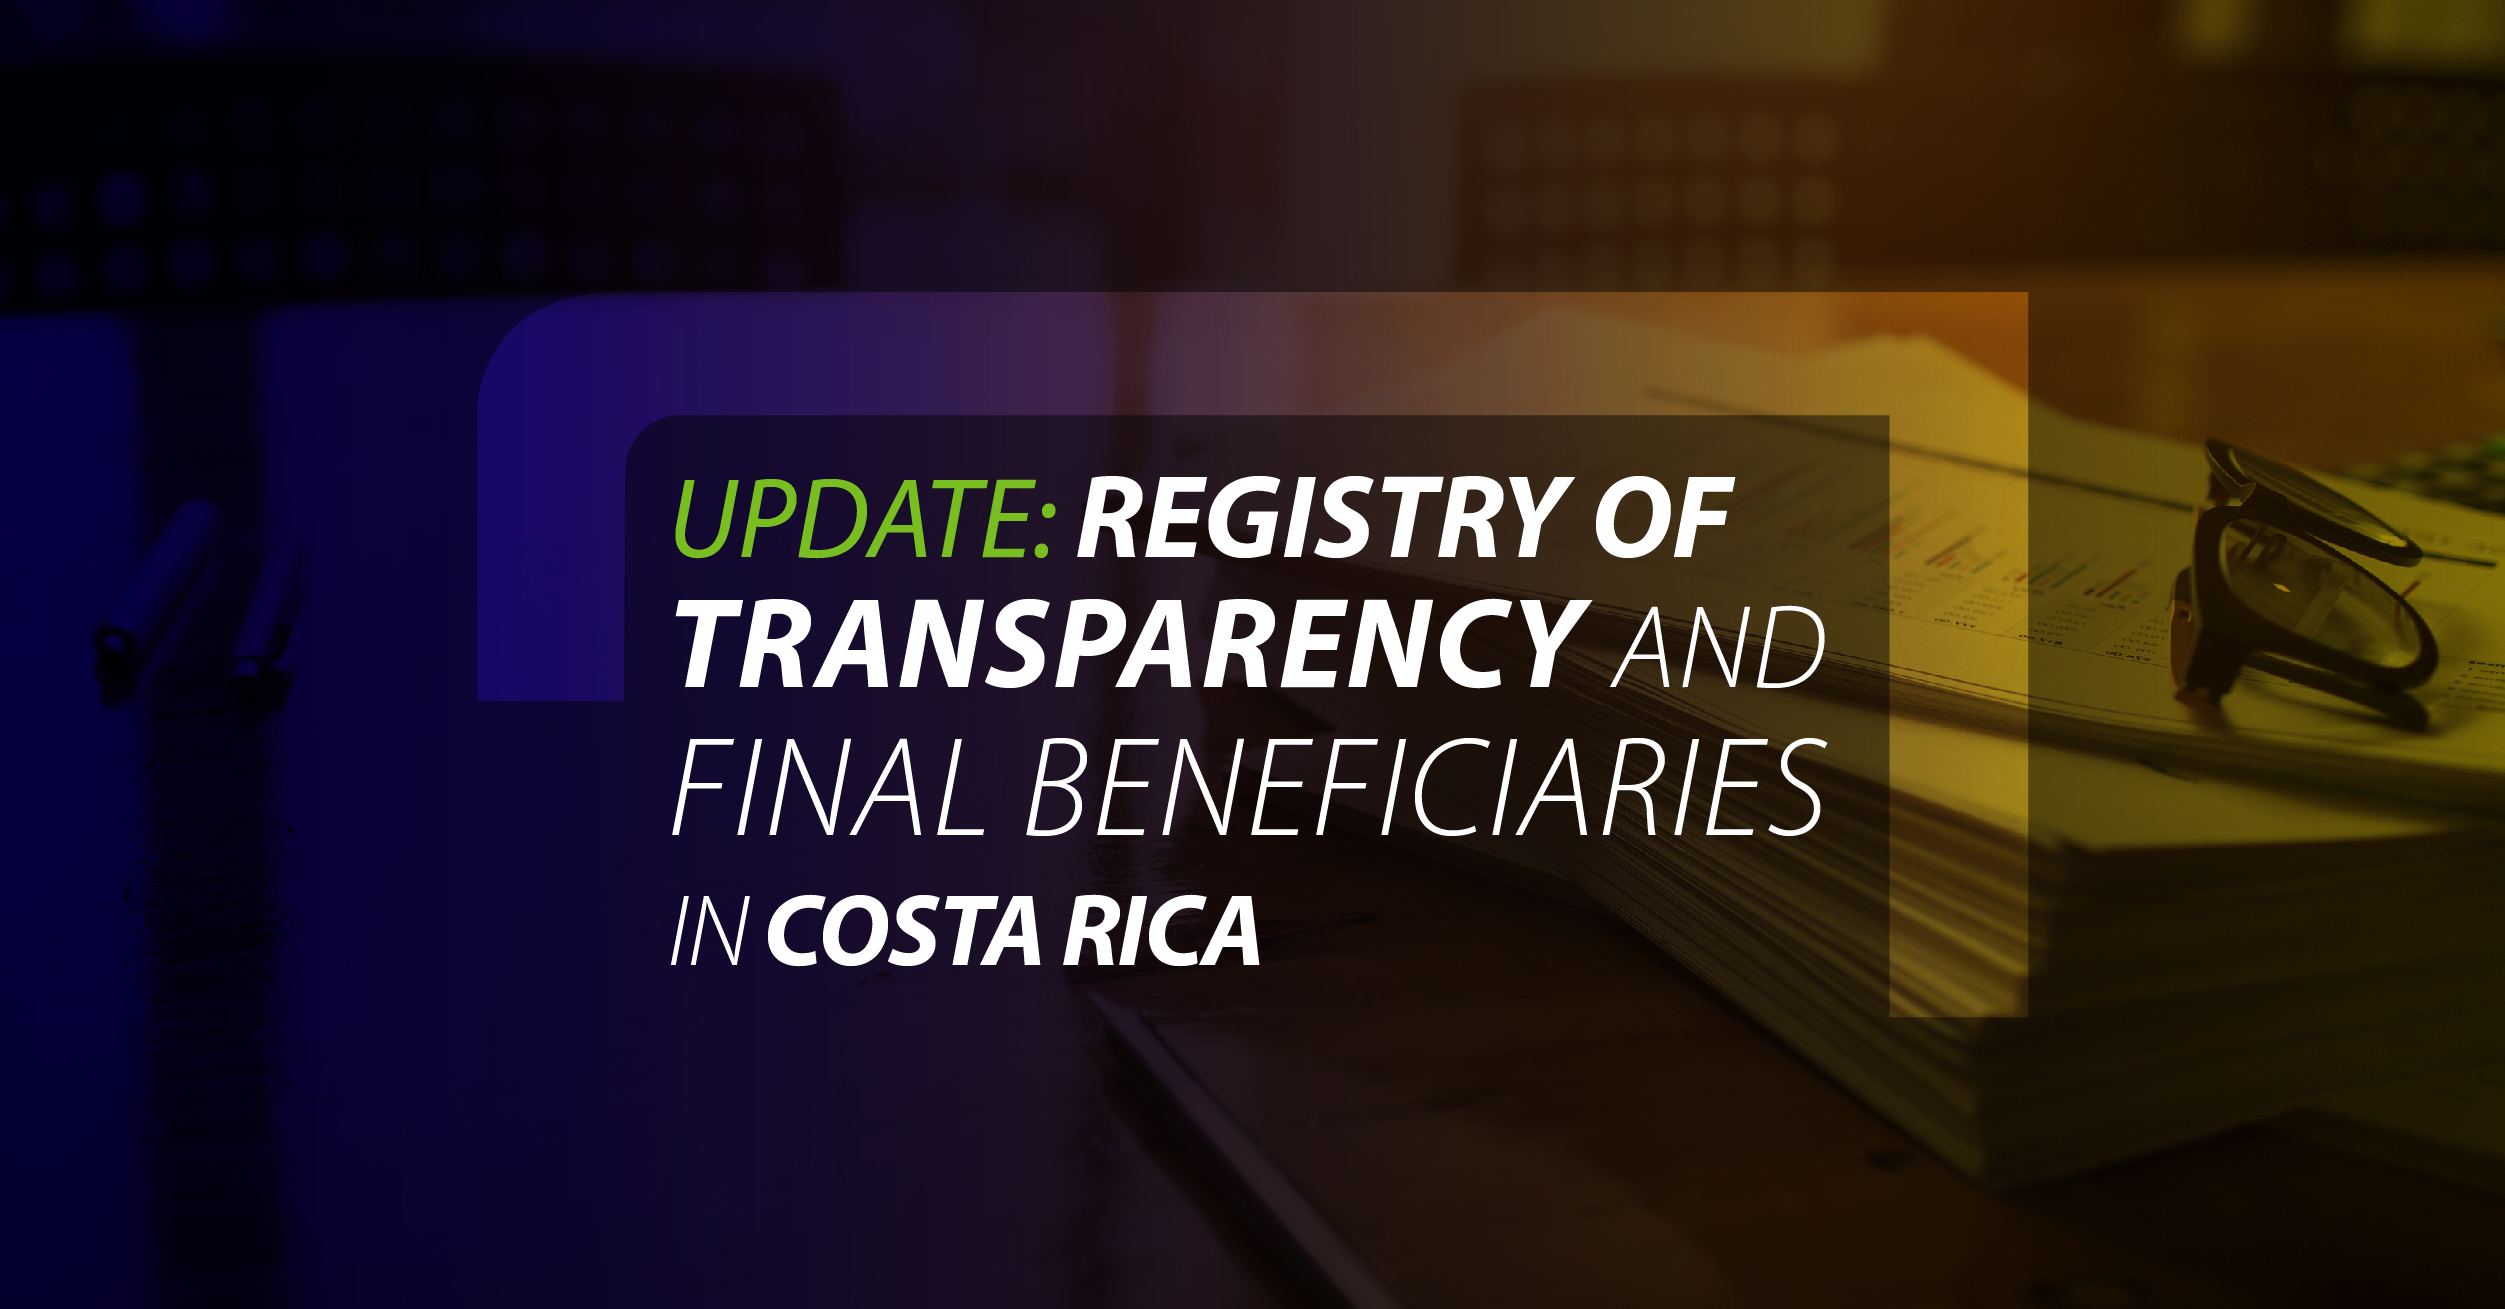 Update: Registry of Transparency and Final Beneficiaries in Costa Rica